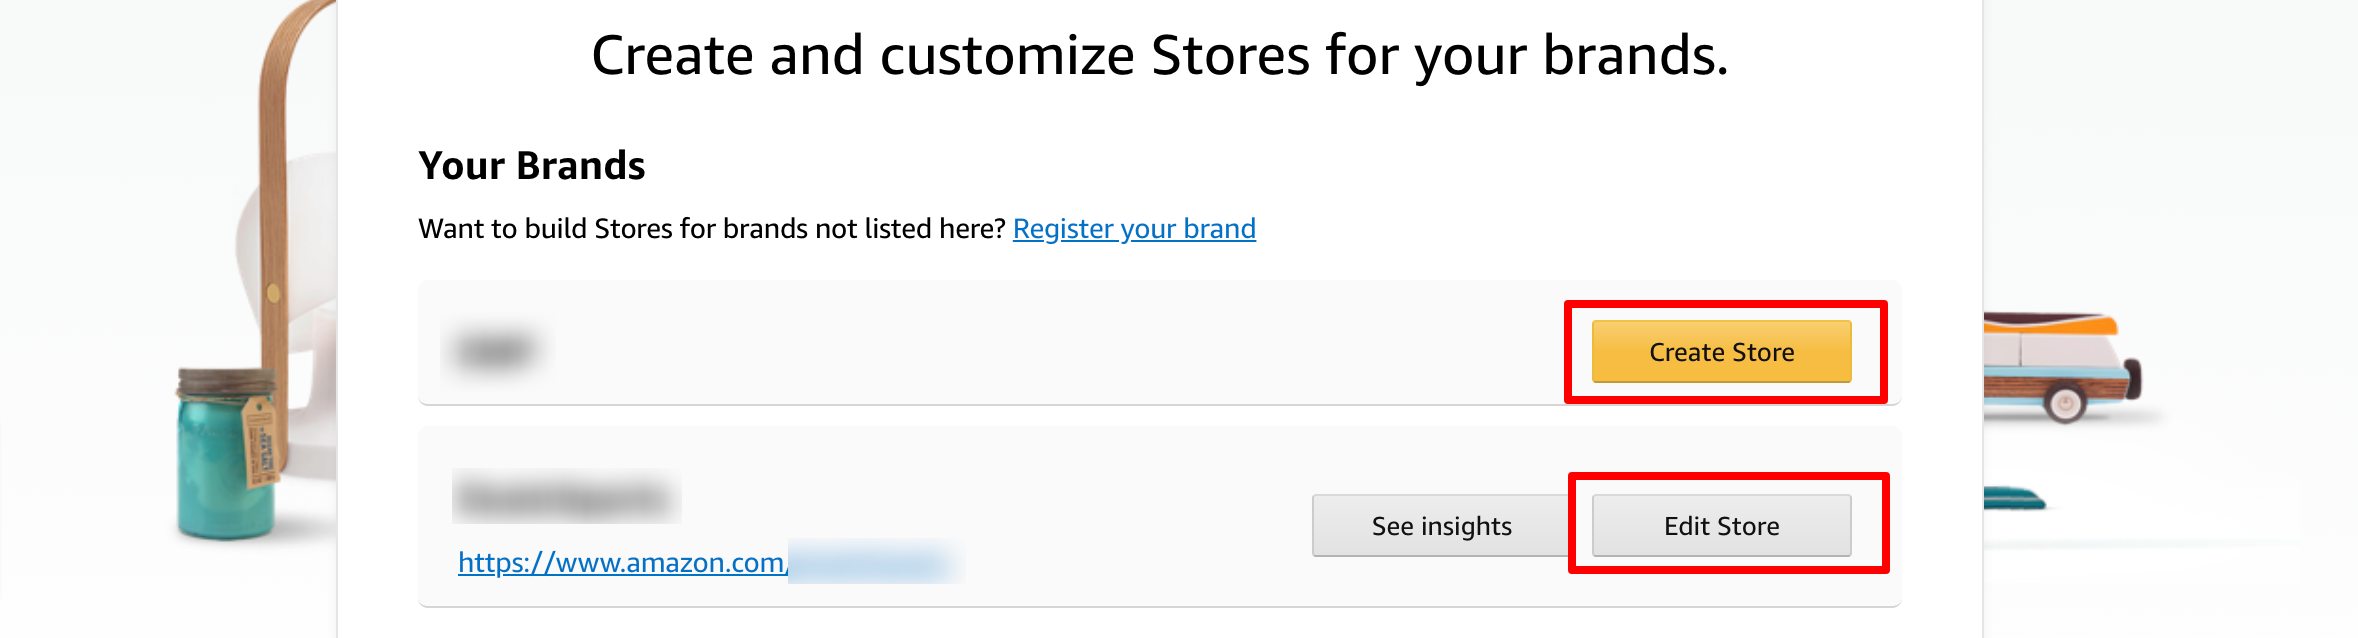 How to create a storefront on Amazon